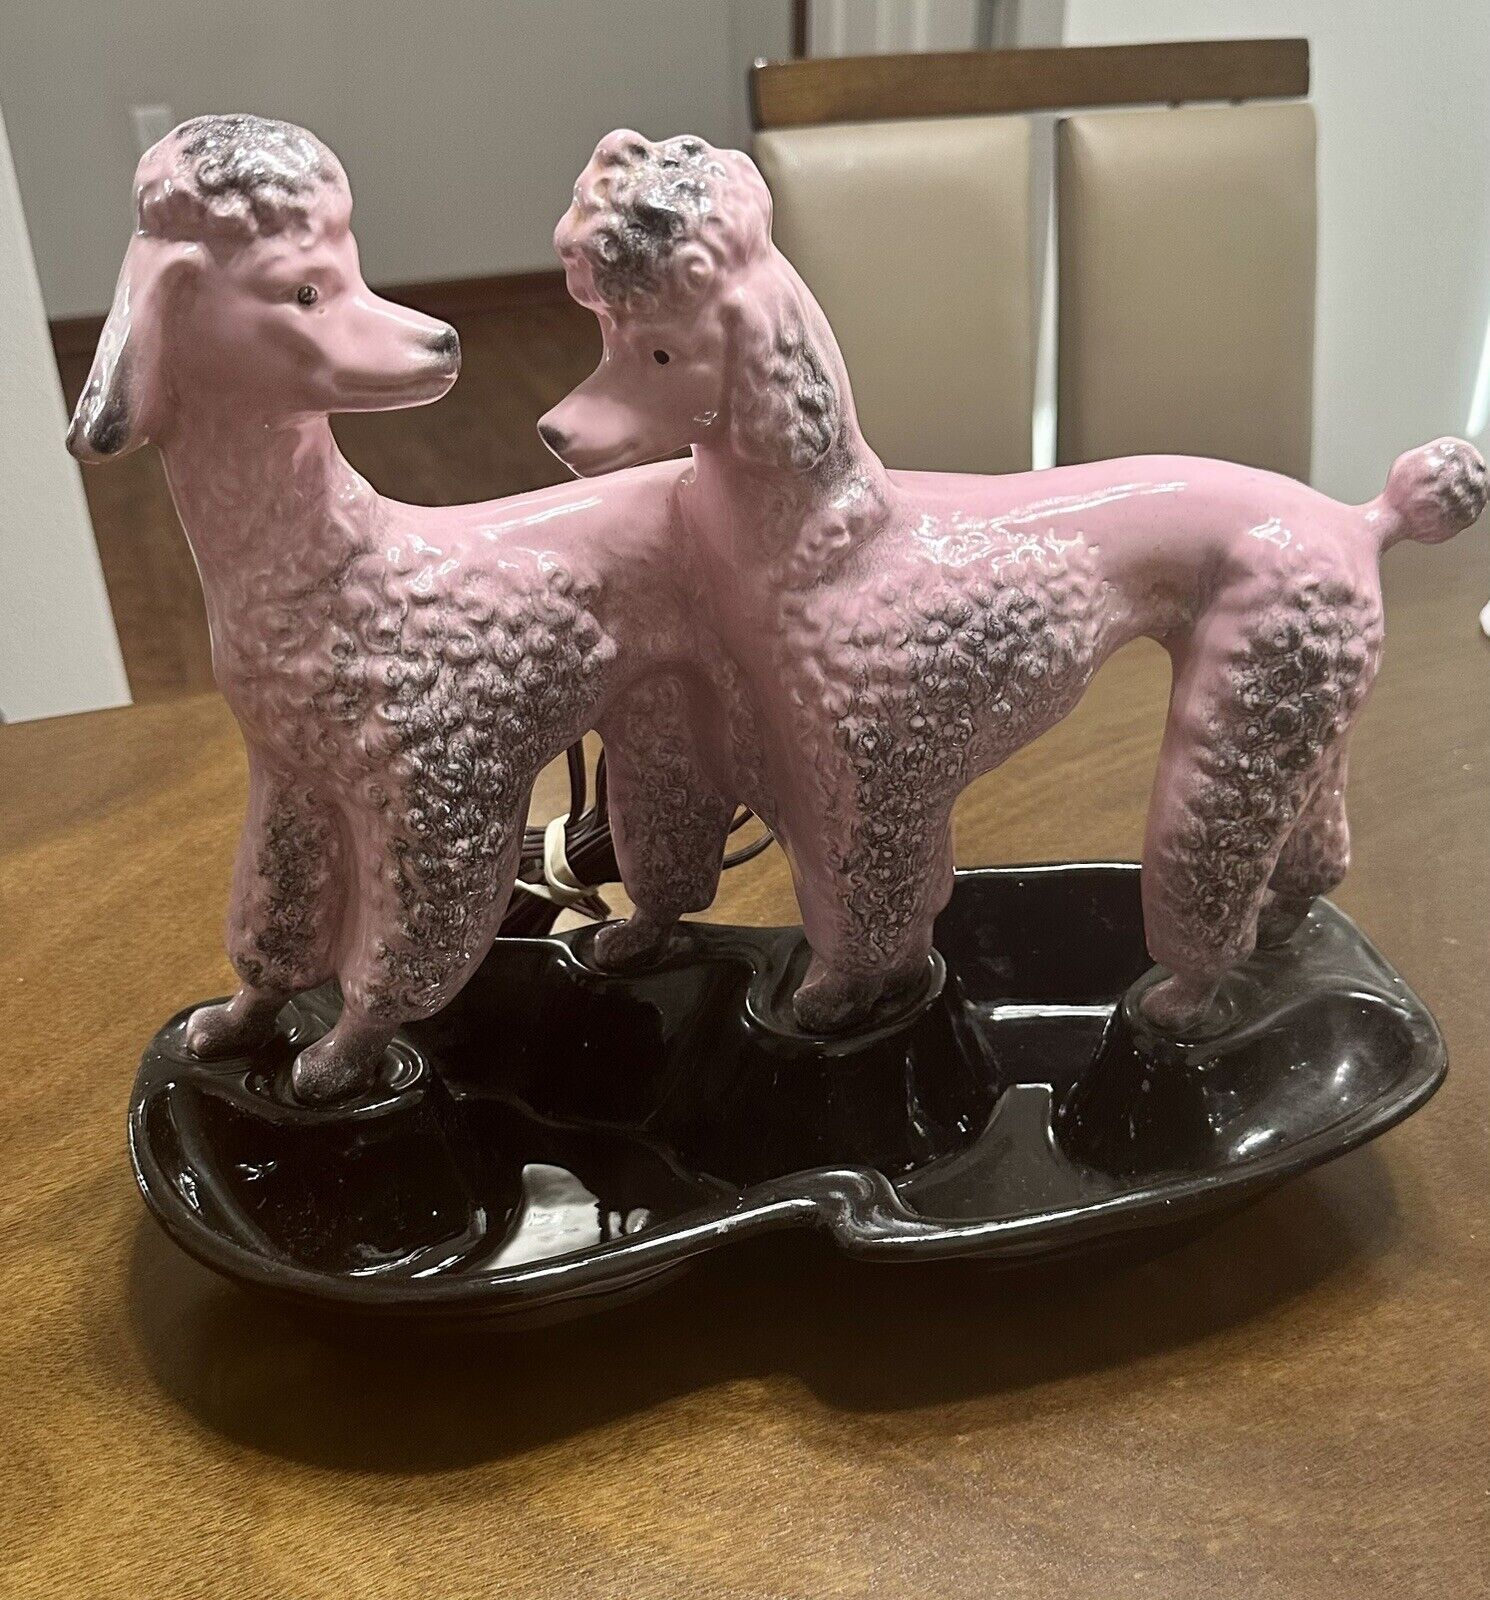 Vinatge lane lamp van nuys CA pink poodle accent table lamp BEAUTIFUL CONDITION